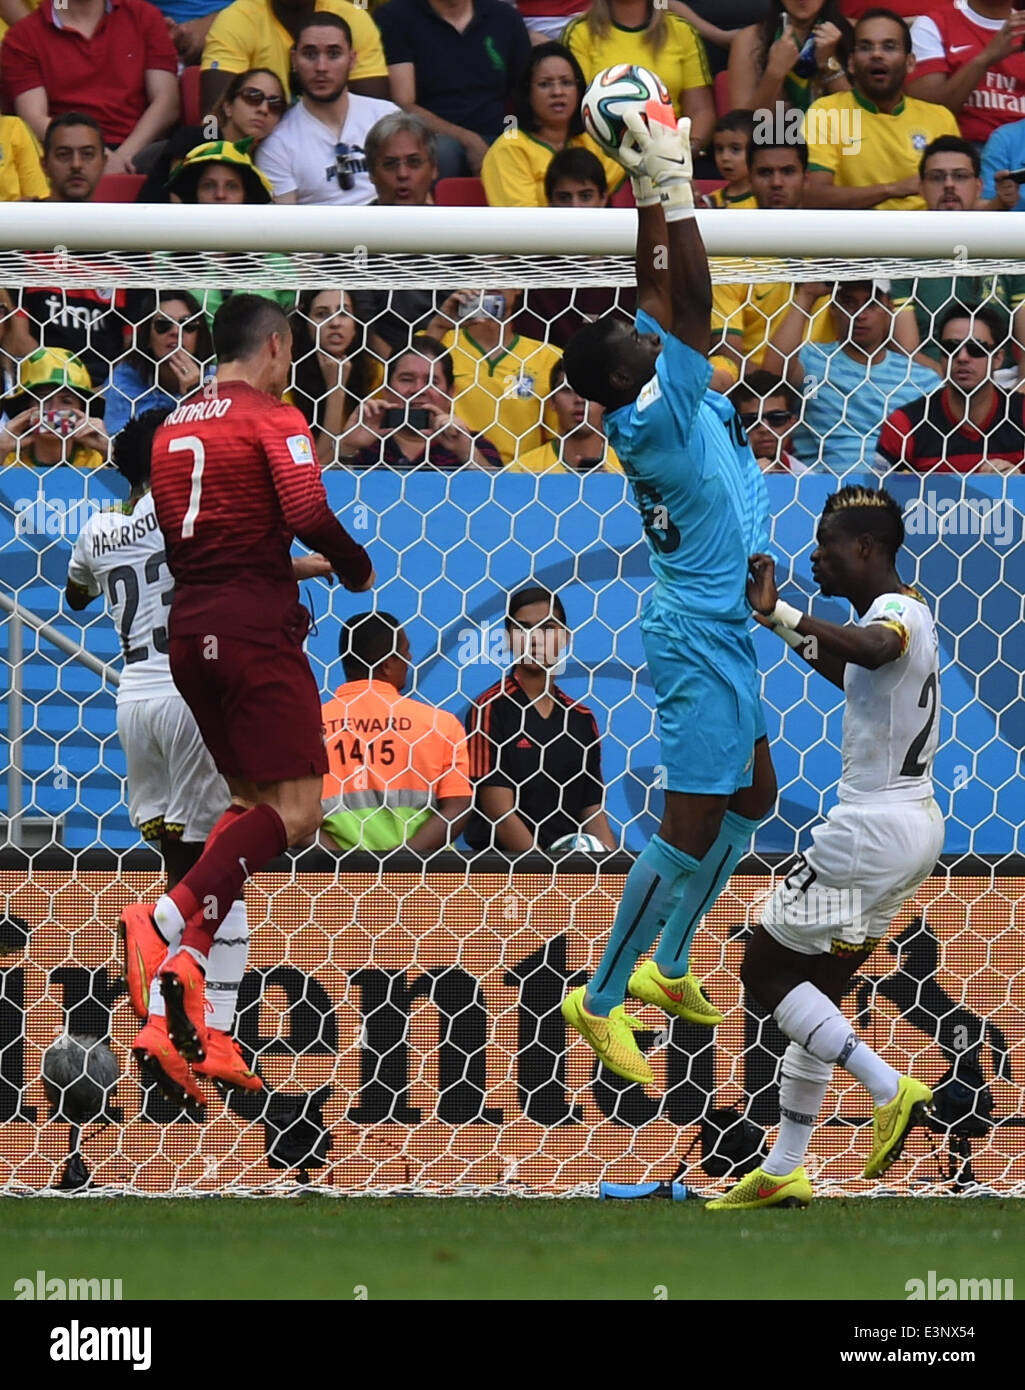 Brasilia, Brazil. 26th June, 2014. Harrison Afful (L-R), goalkeeper Fatawu Dauda, John Boye of Ghana in action against Cristiano Ronaldo (2-l) of Portugal during the FIFA World Cup 2014 group G preliminary round match between Portugal and Ghana at the Estadio National Stadium in Brasilia, Brazil, on 26 June 2014 Credit: © dpa picture alliance/Alamy Live News  Stock Photo